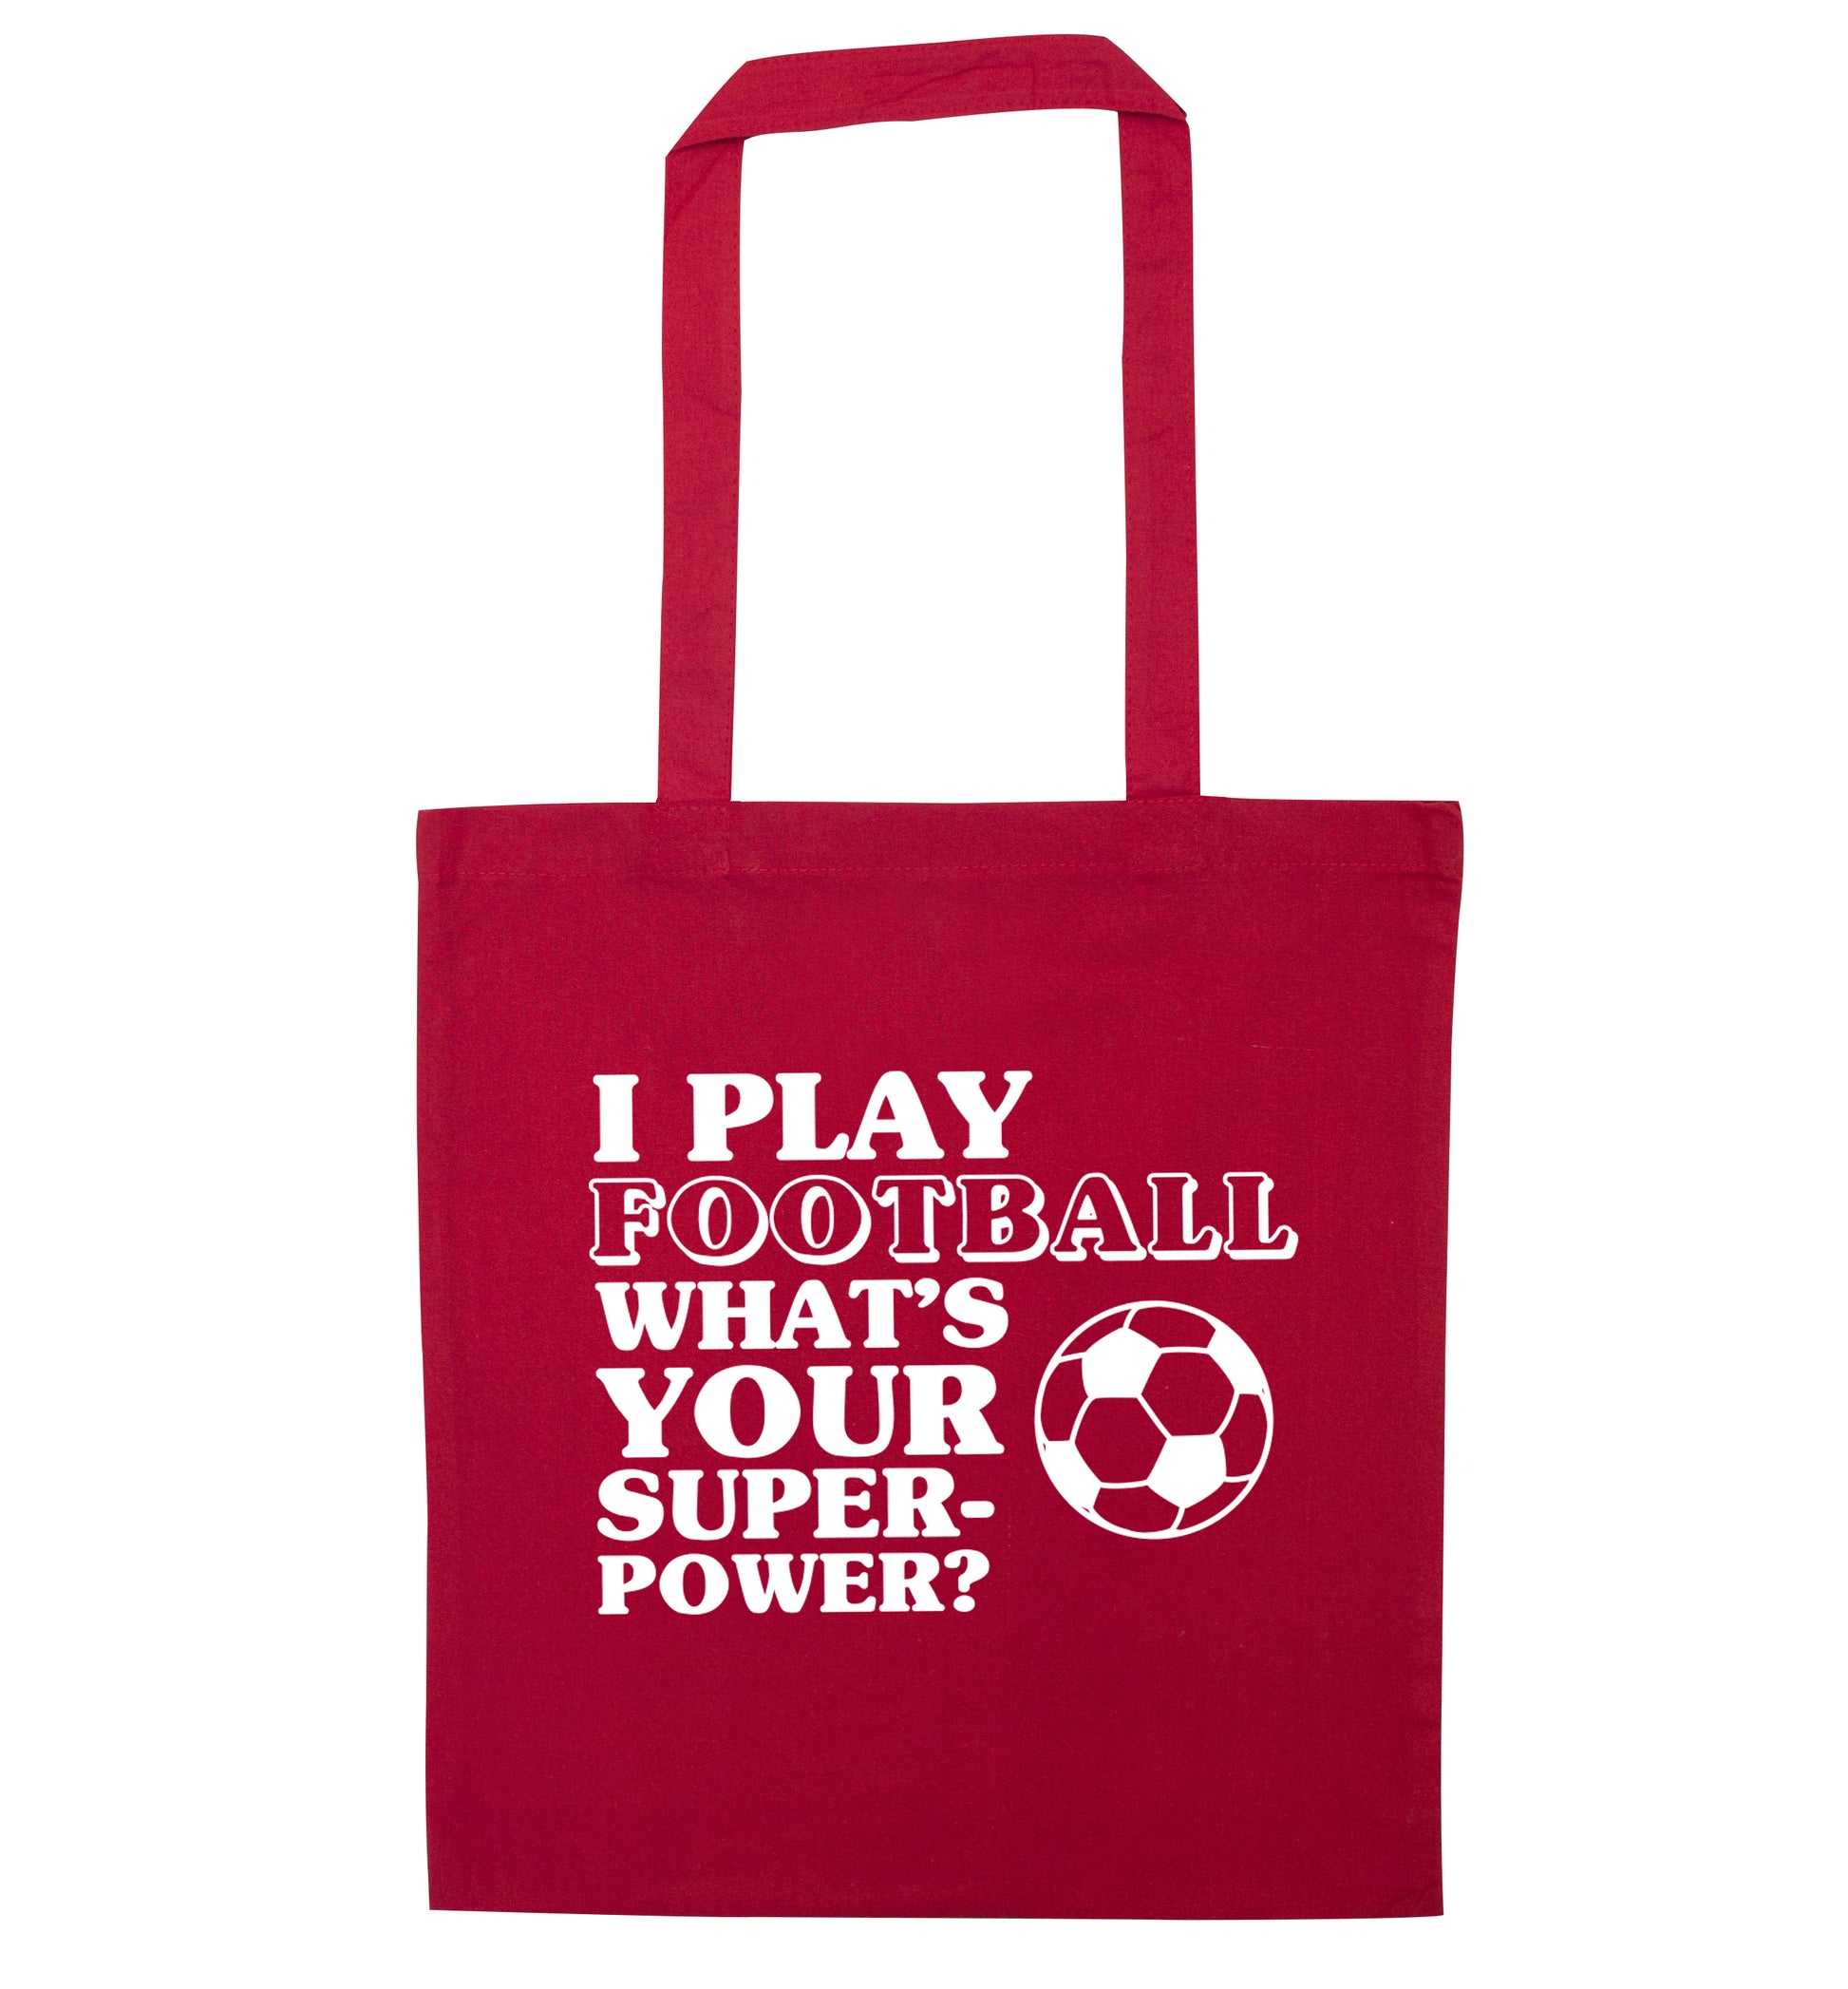 I play football what's your superpower? red tote bag